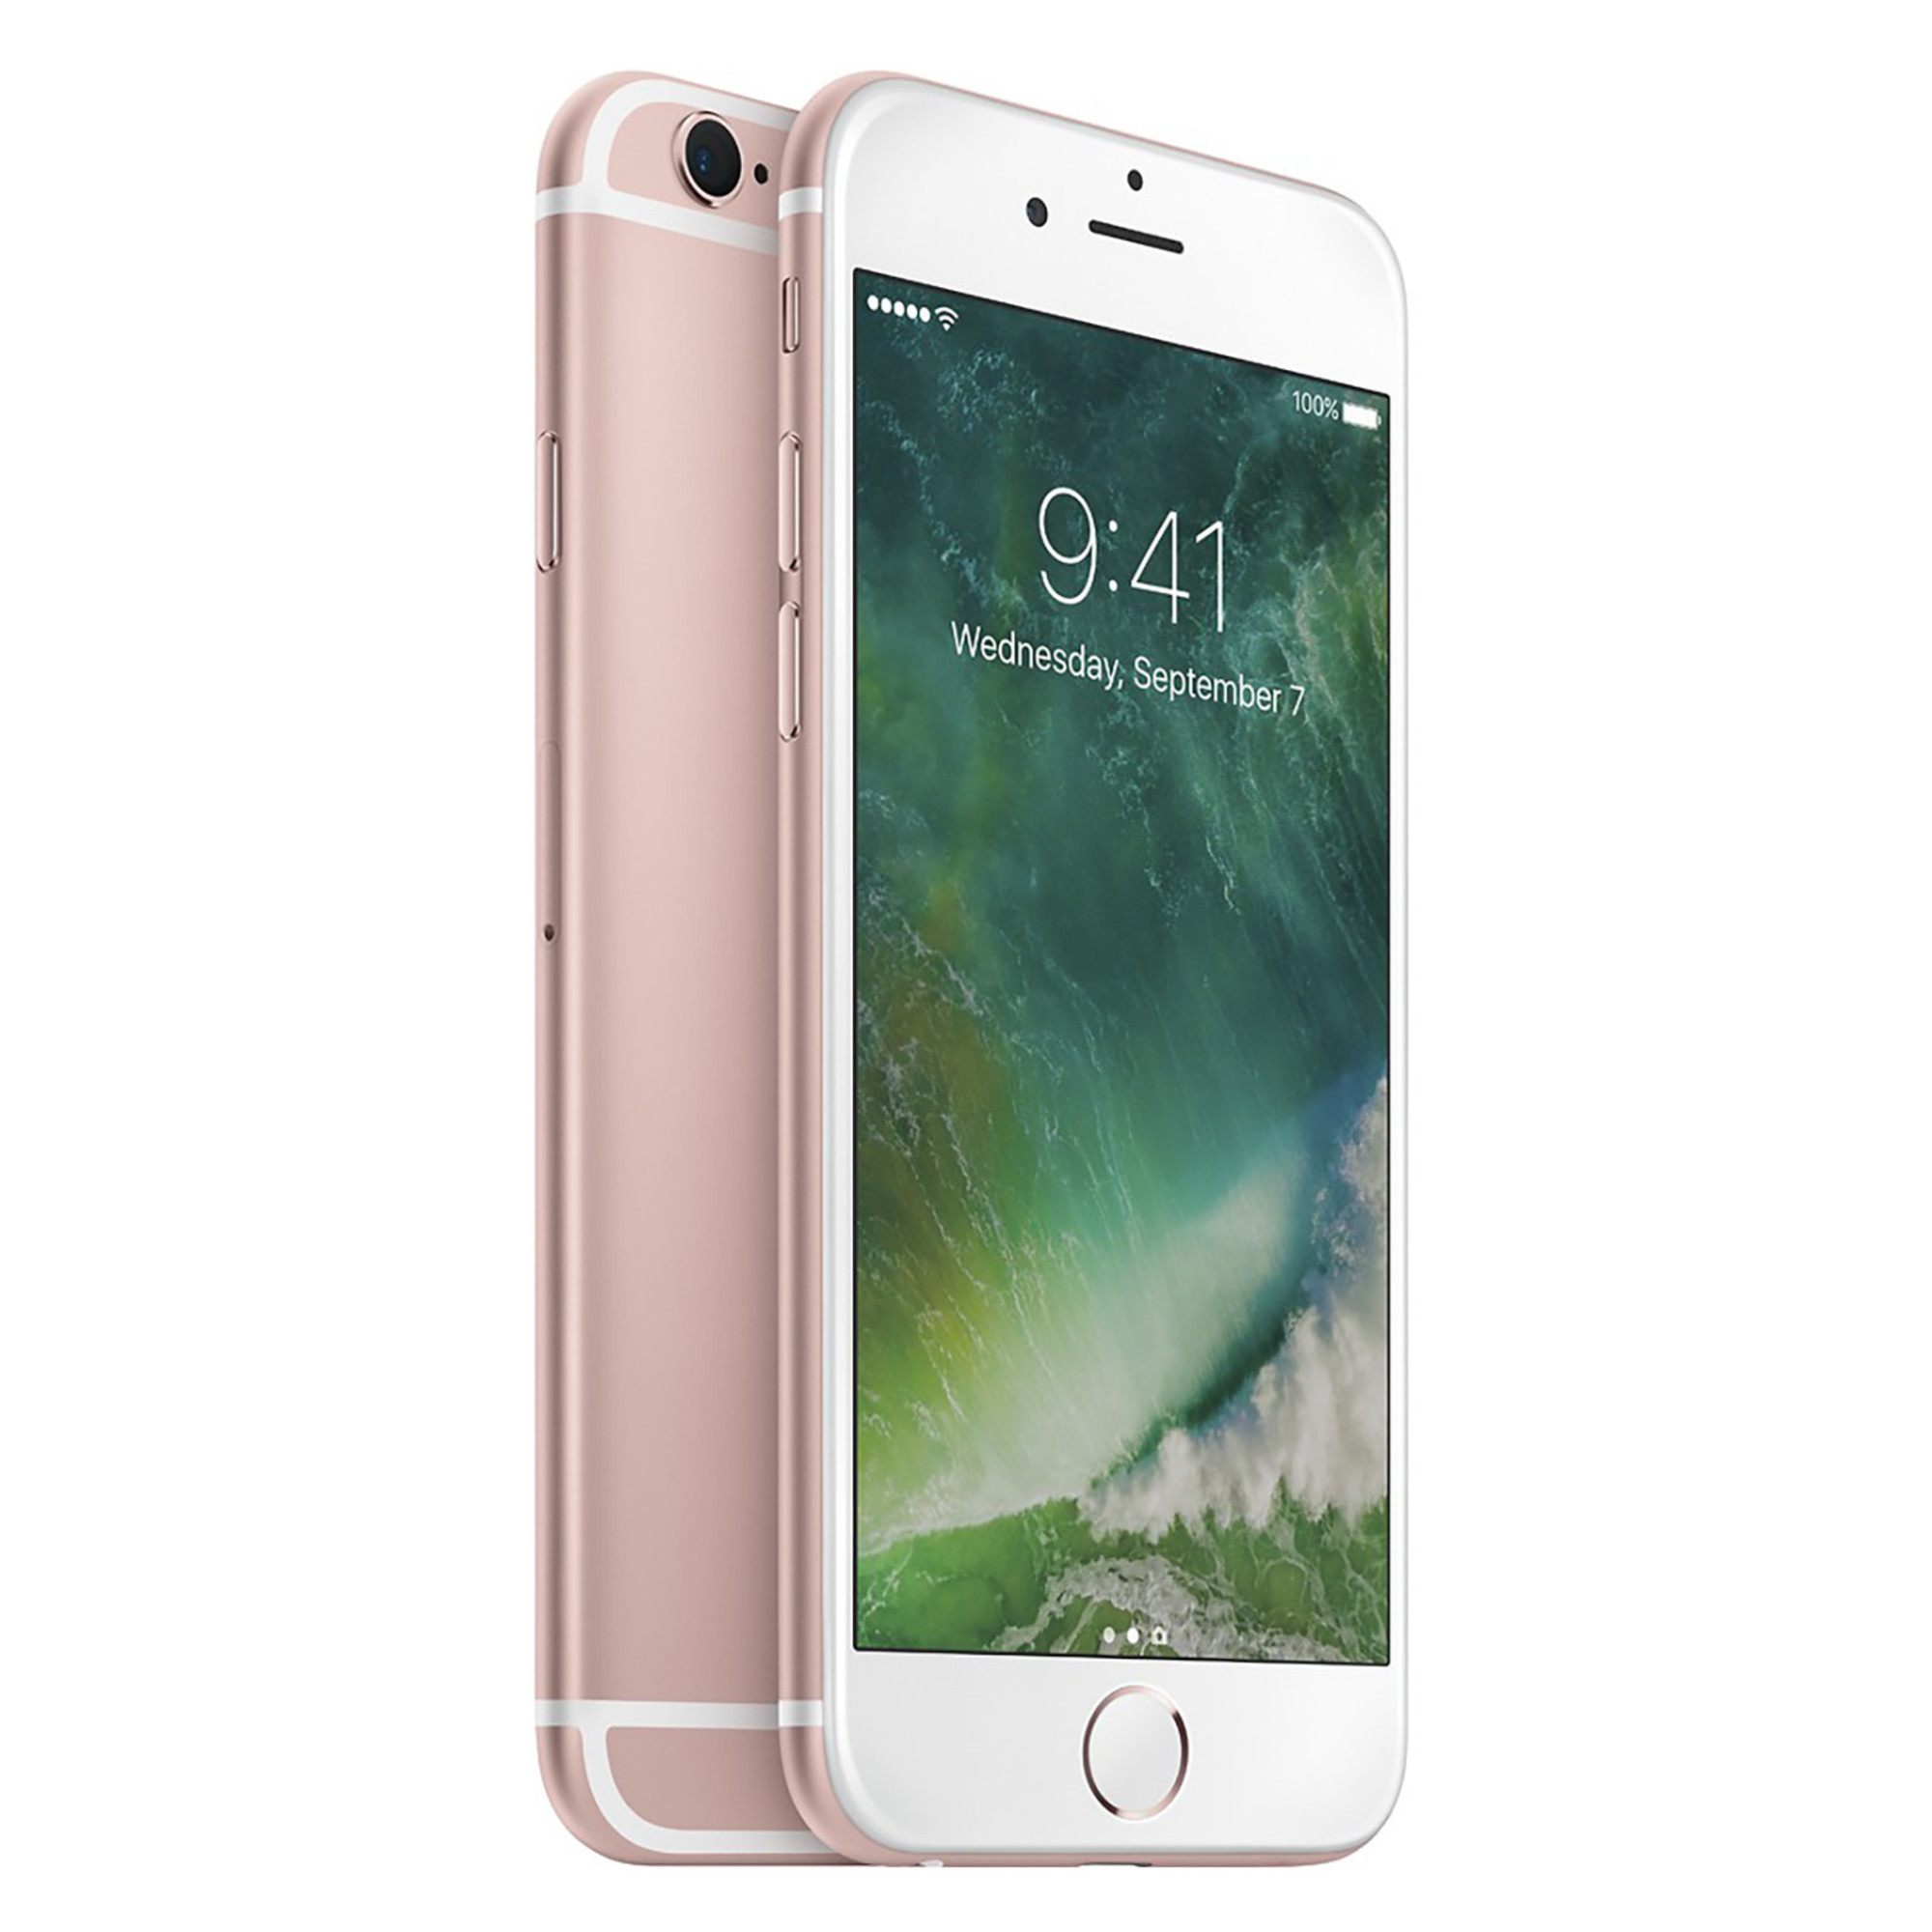 Apple iPhone 6s 16GB GSM Phone - Rose Gold (Used) + WeCare Alcohol Wipes Pack (50 Wipes) - image 1 of 6